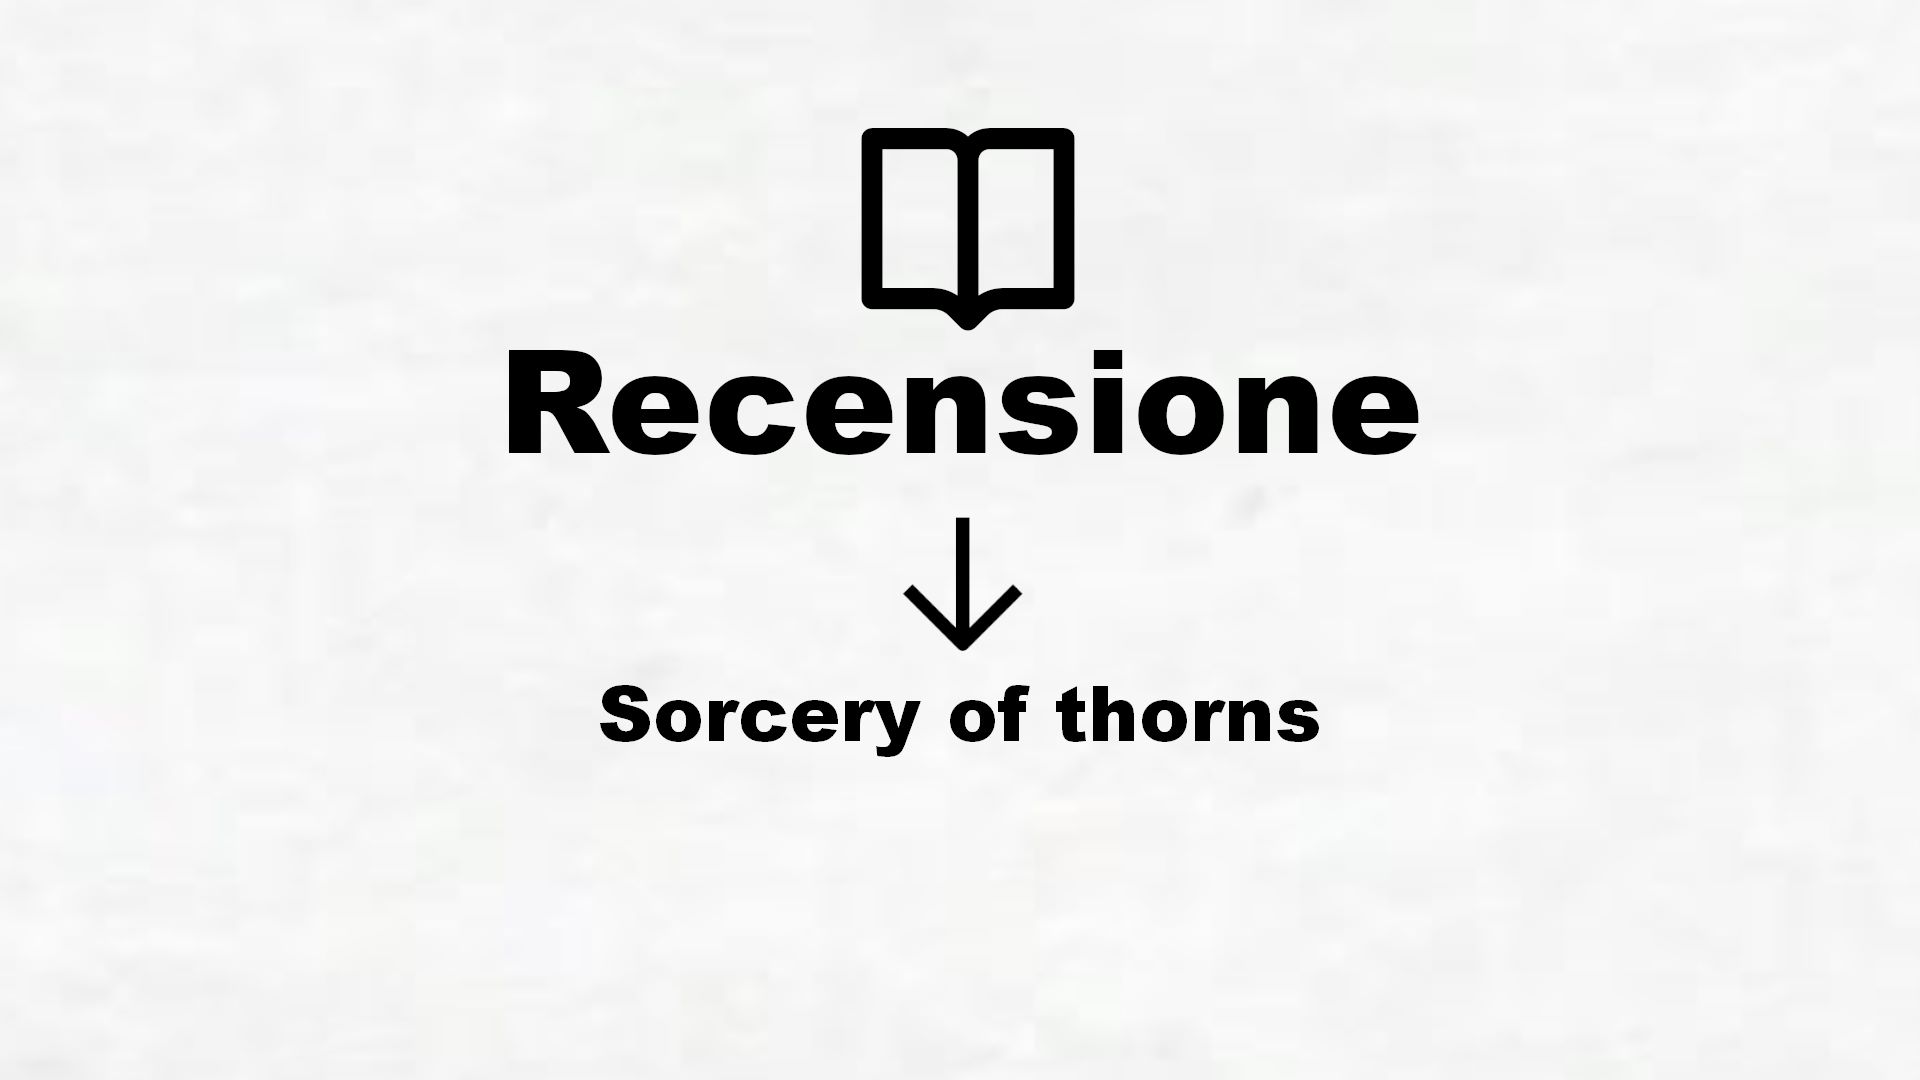 Sorcery of thorns – Recensione Libro